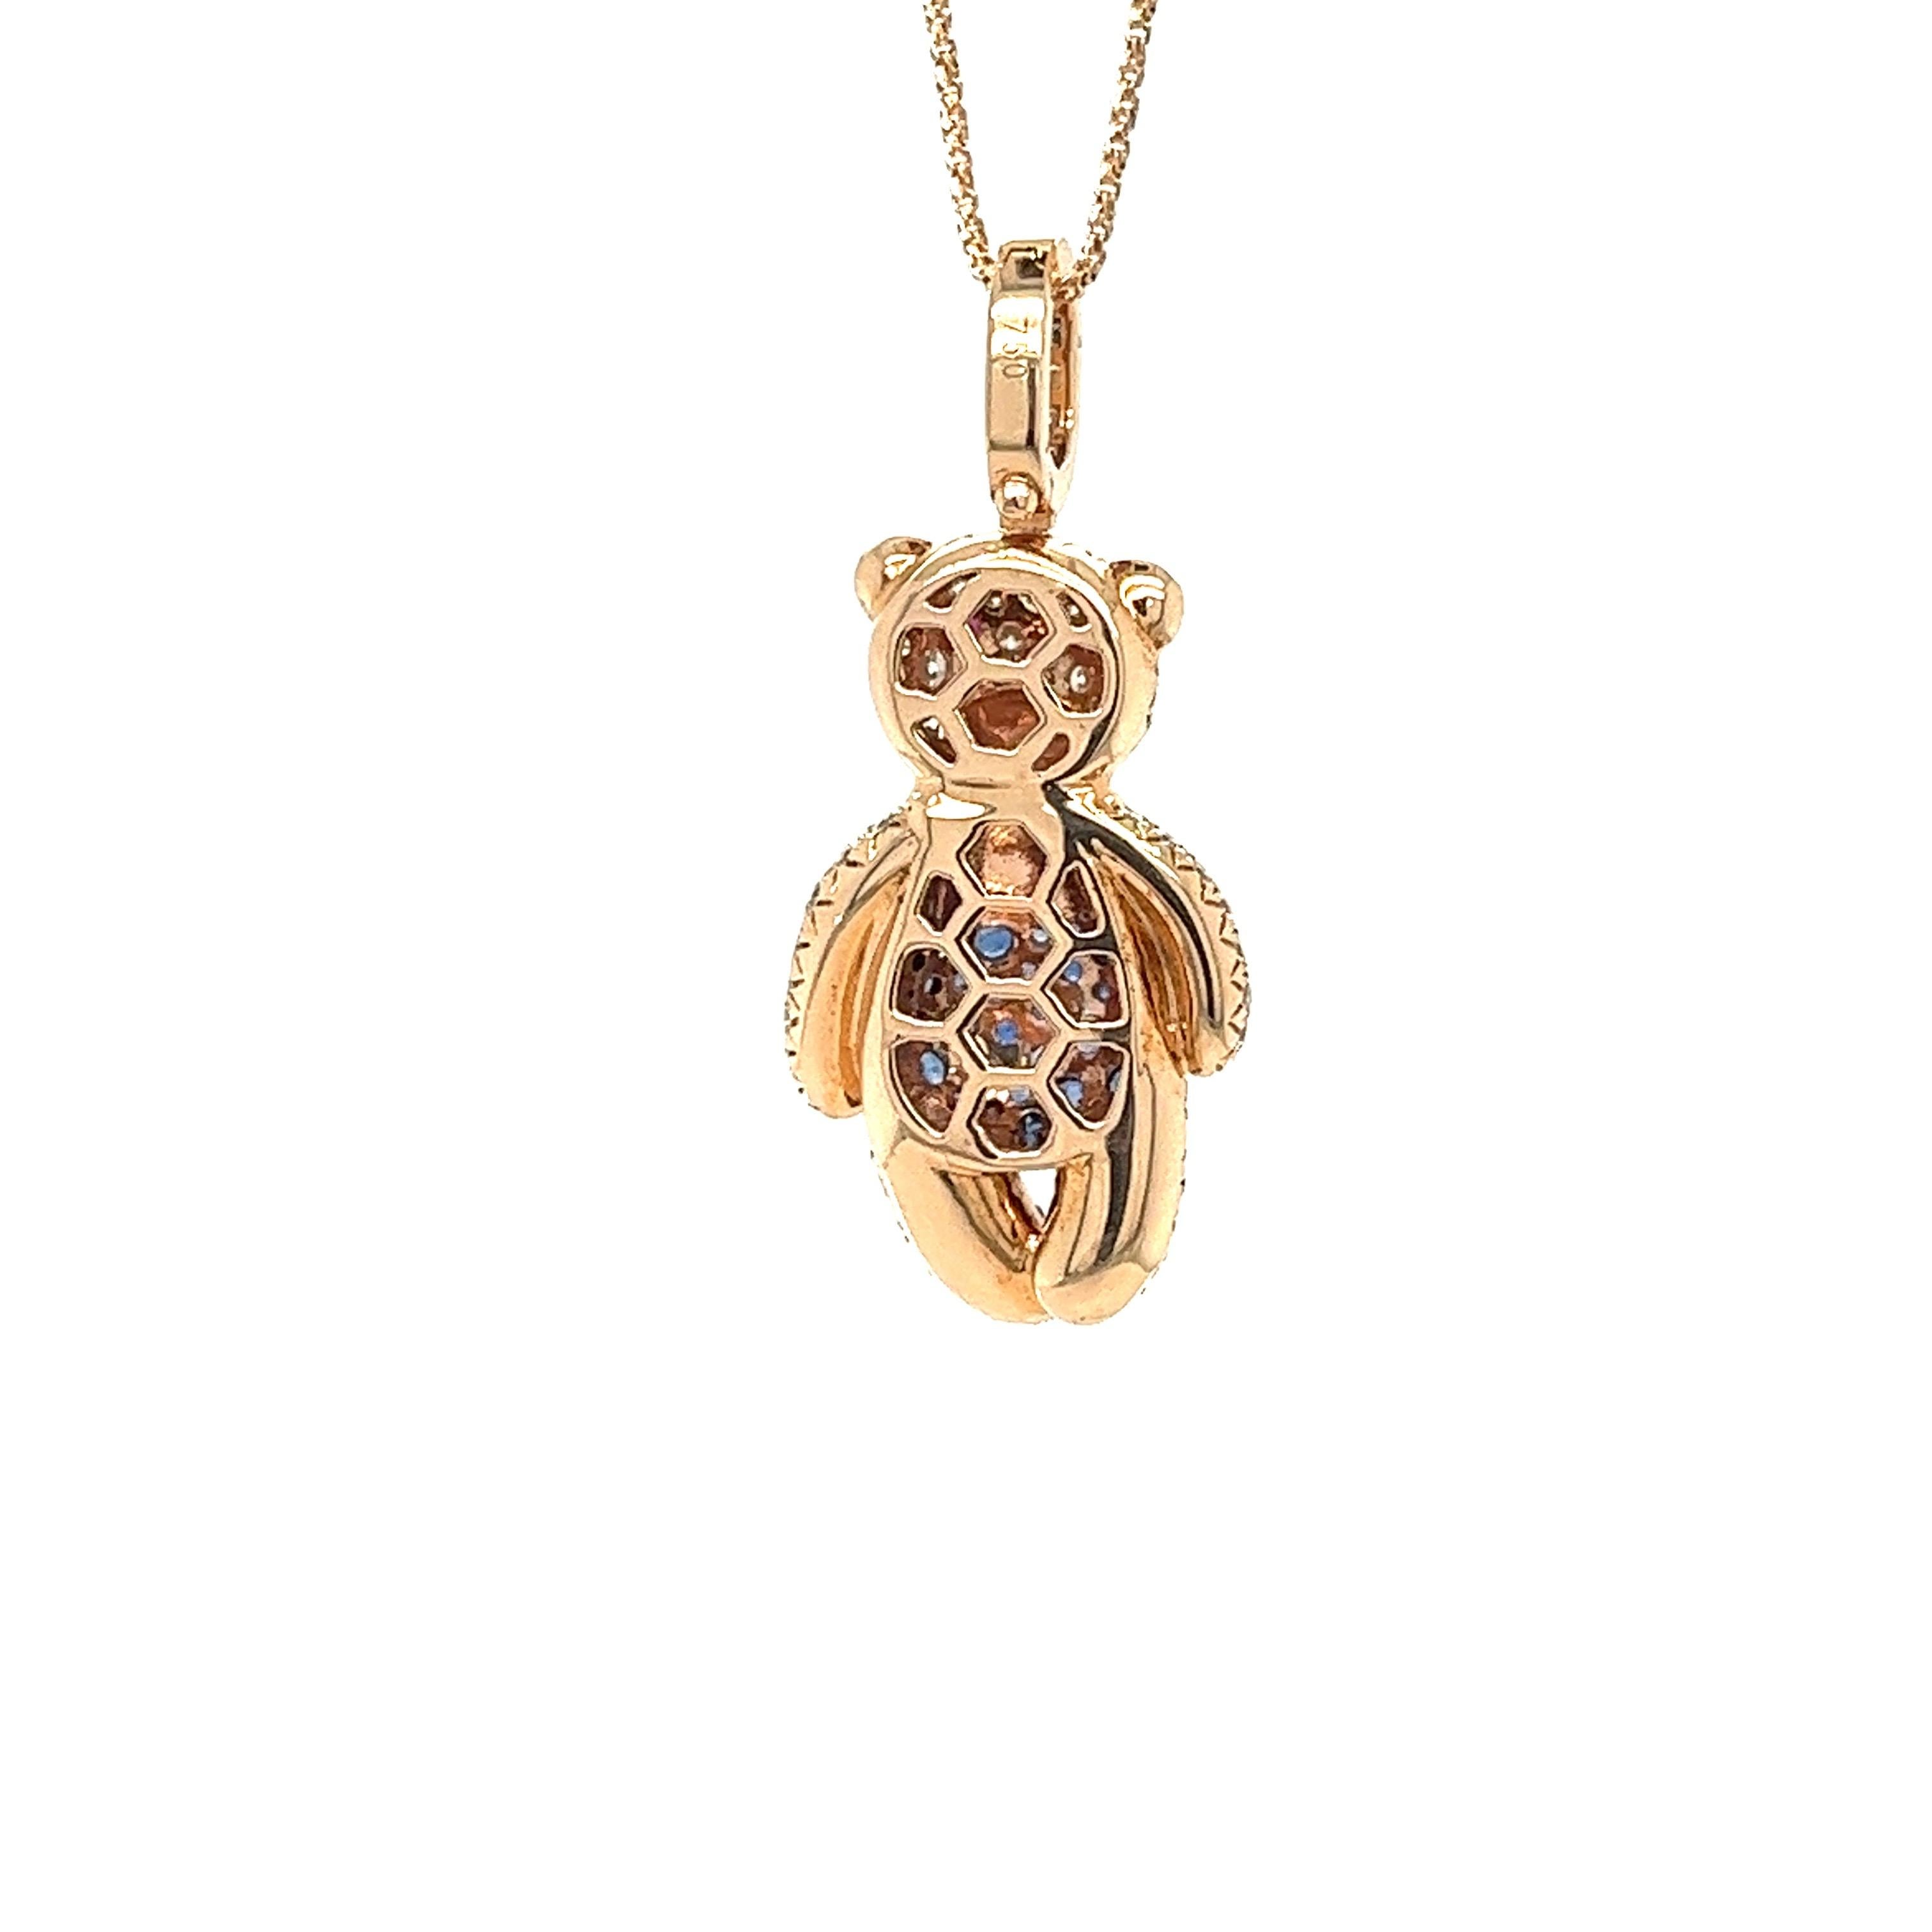 Round Cut 18K Gold Bear Necklace with Fancy Diamonds & Blue Sapphires